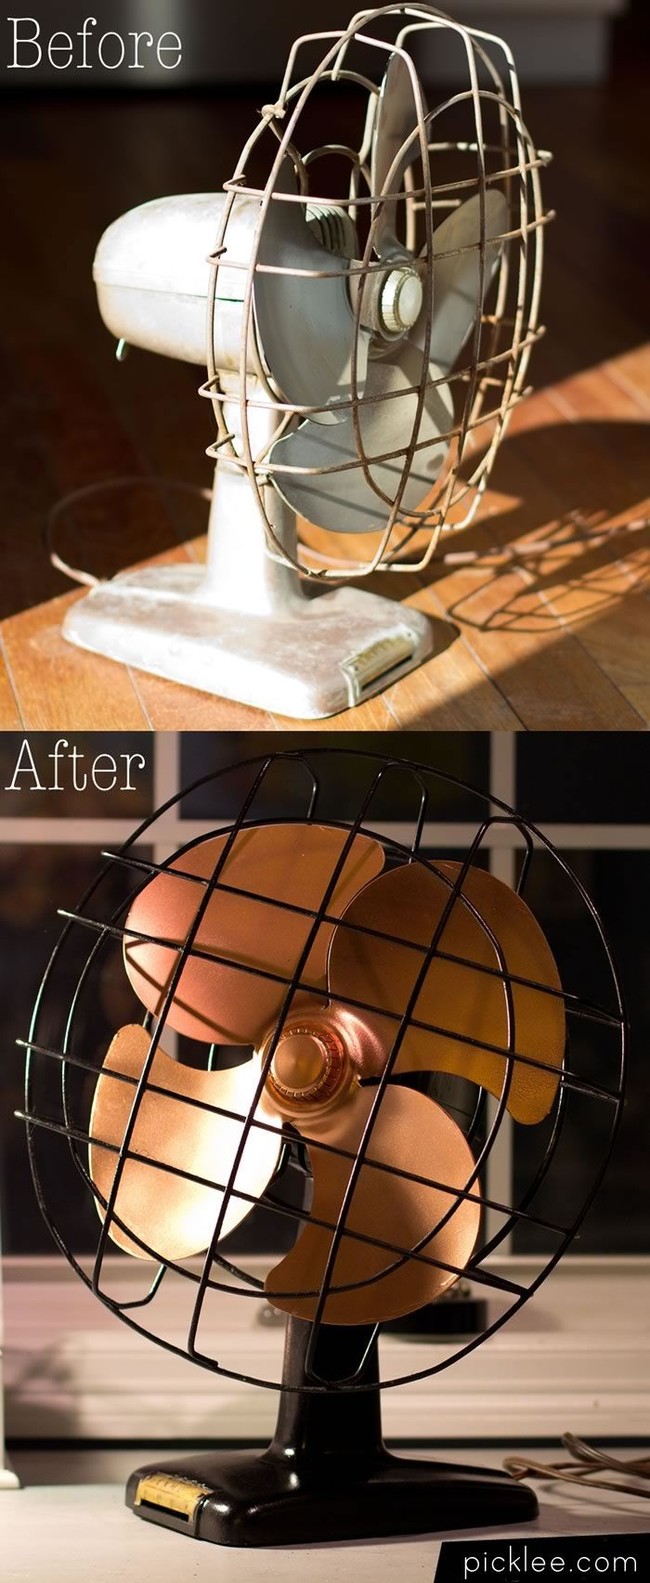 Don't spend a bunch on a fancy fan, <a href="http://www.picklee.com/2012/11/07/the-vintage-fan-restoration-before-after/" target="_blank">make one yourself</a>! 